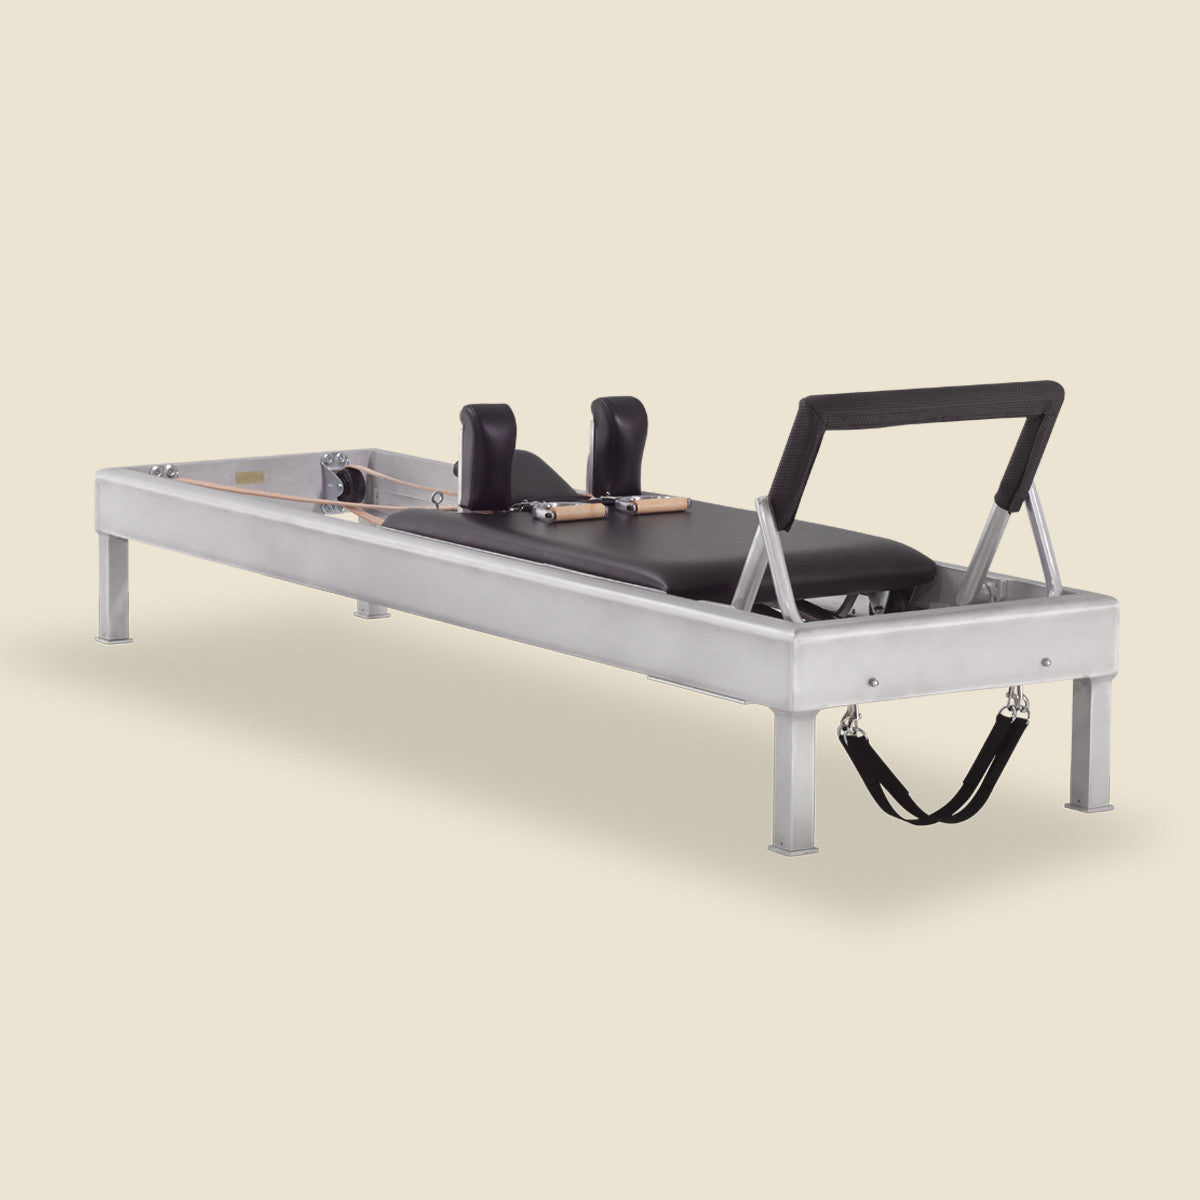 Instant Full Cadillac Conversion with 89 Universal Reformer